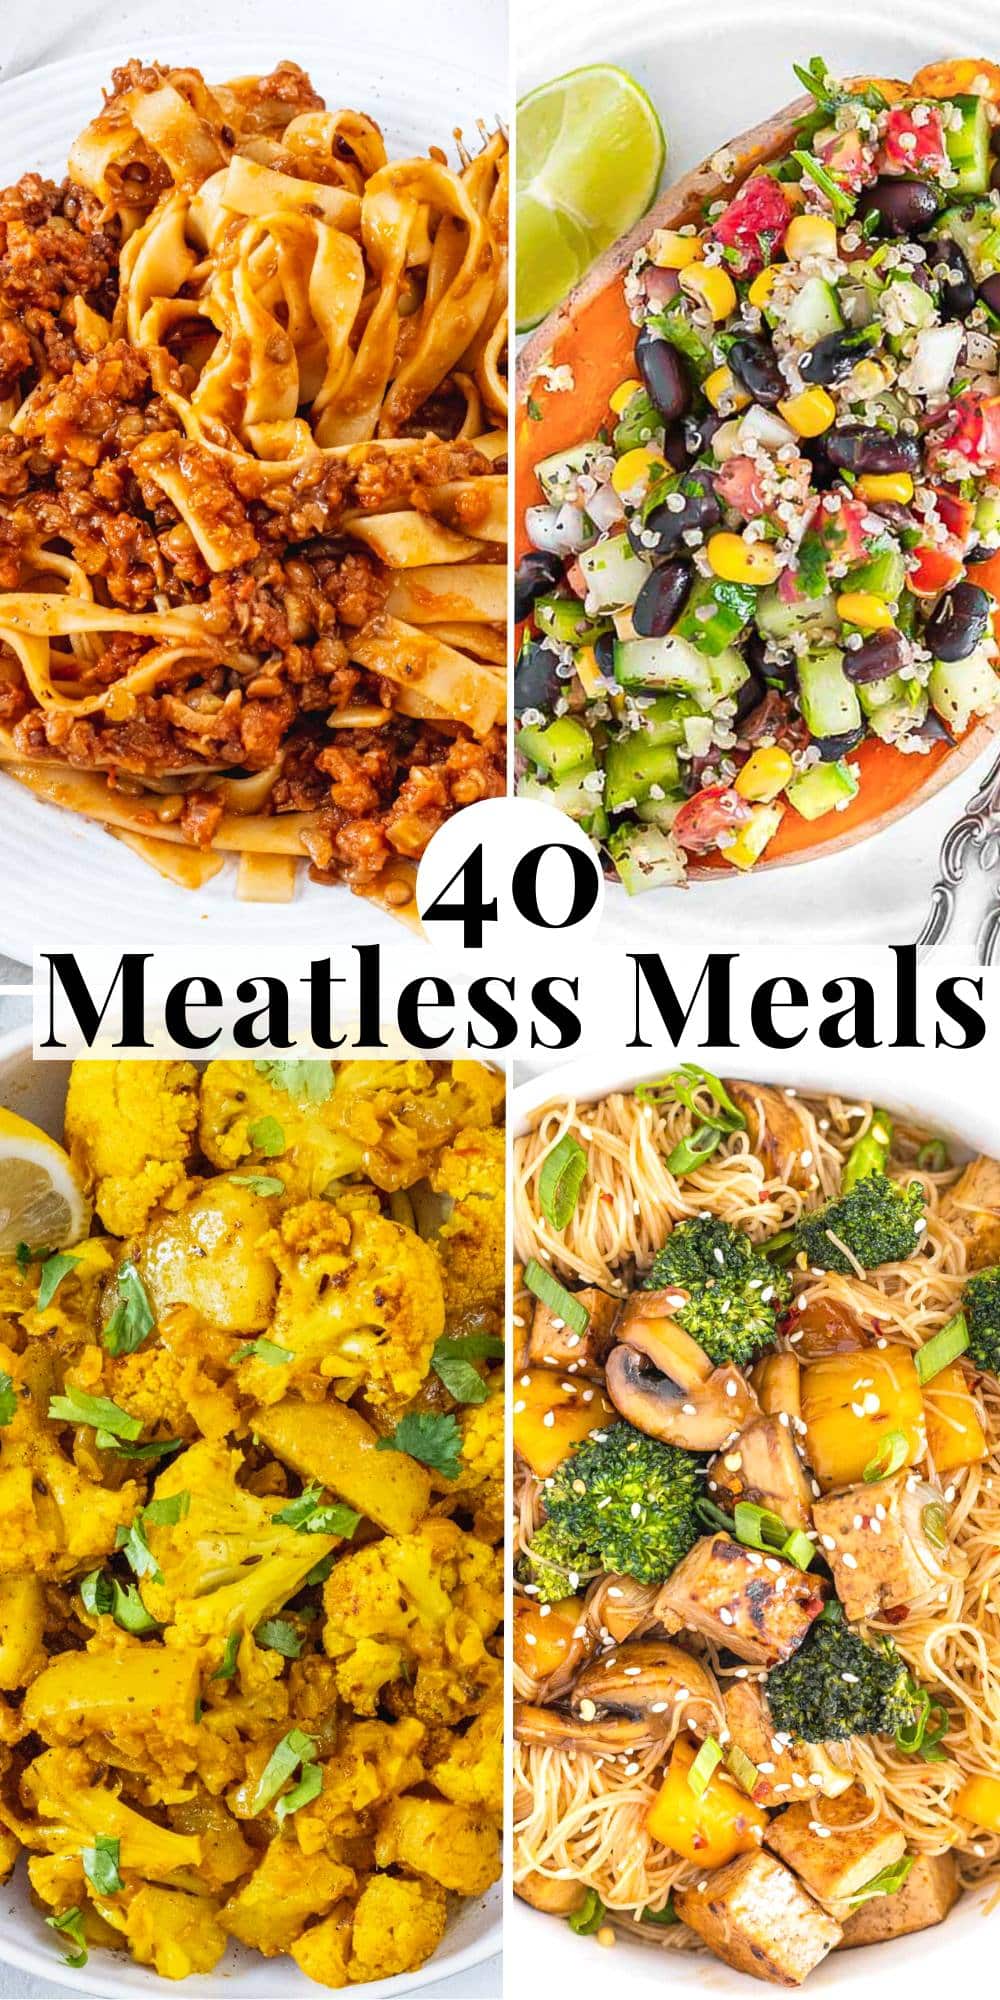 40 Easy Meatless Meals - The Plant Based School